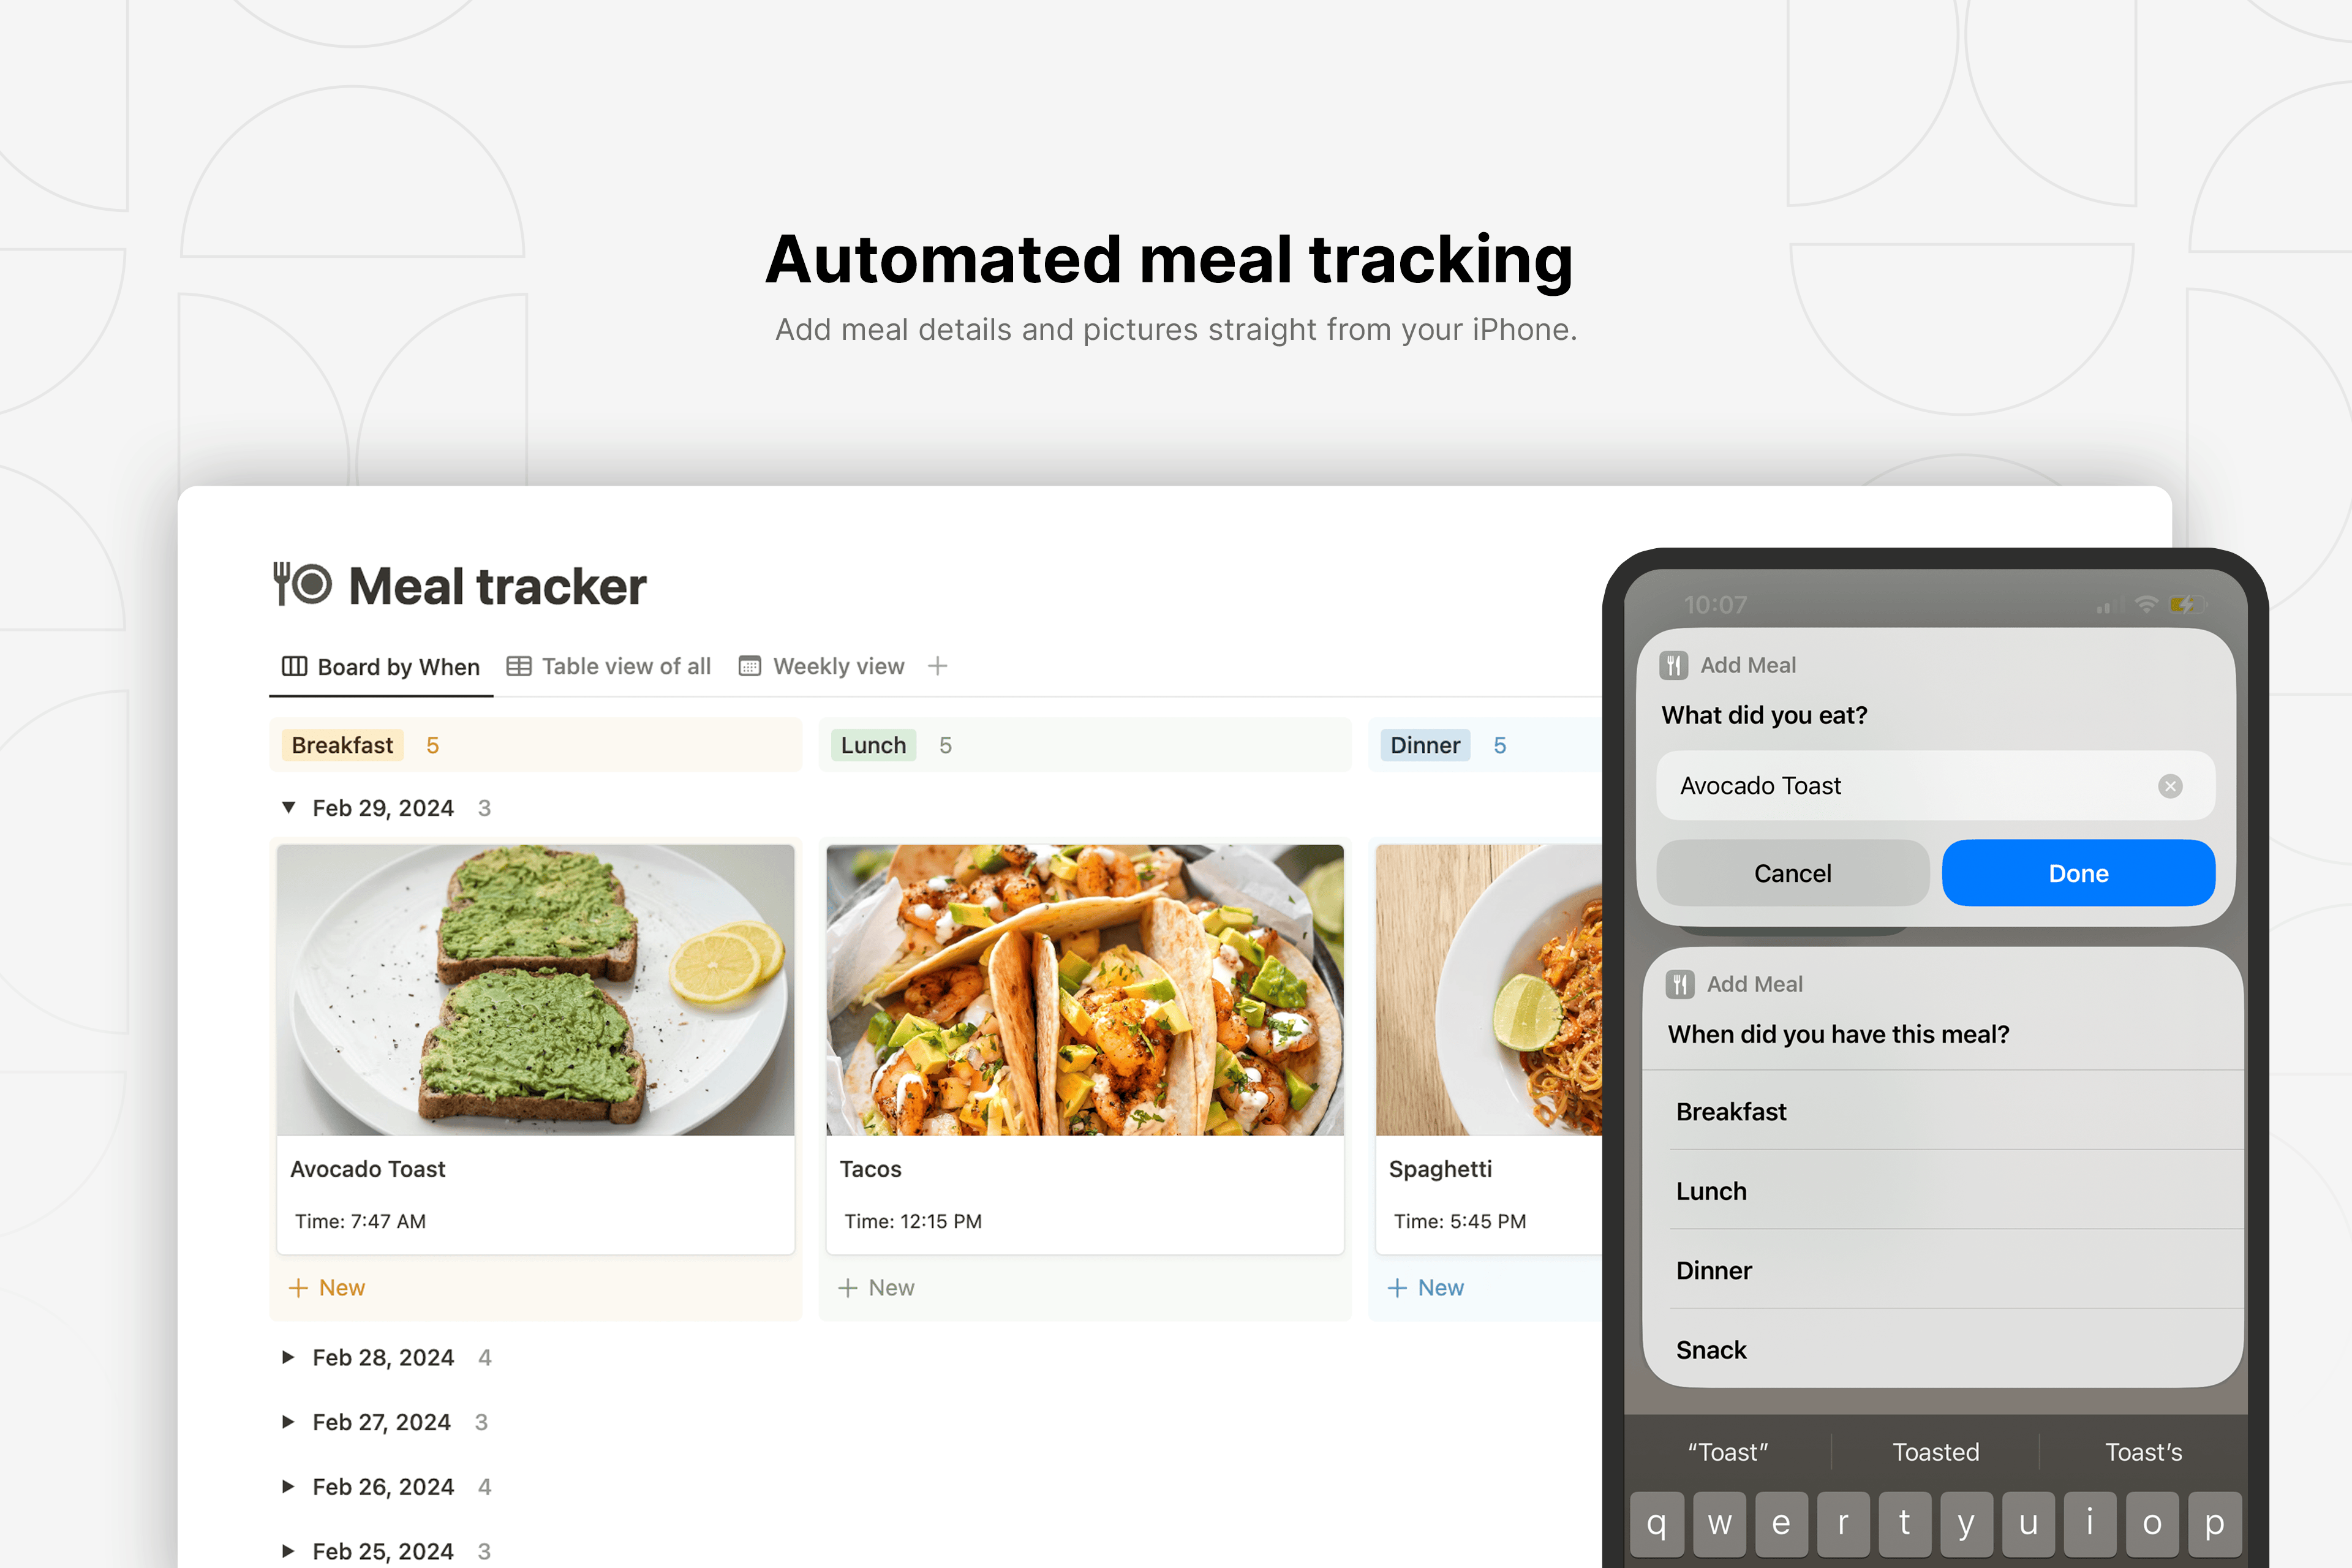 Tracking your meals has never been this easy! Use this template to easily log your meals straight from your iPhone's homescreen.